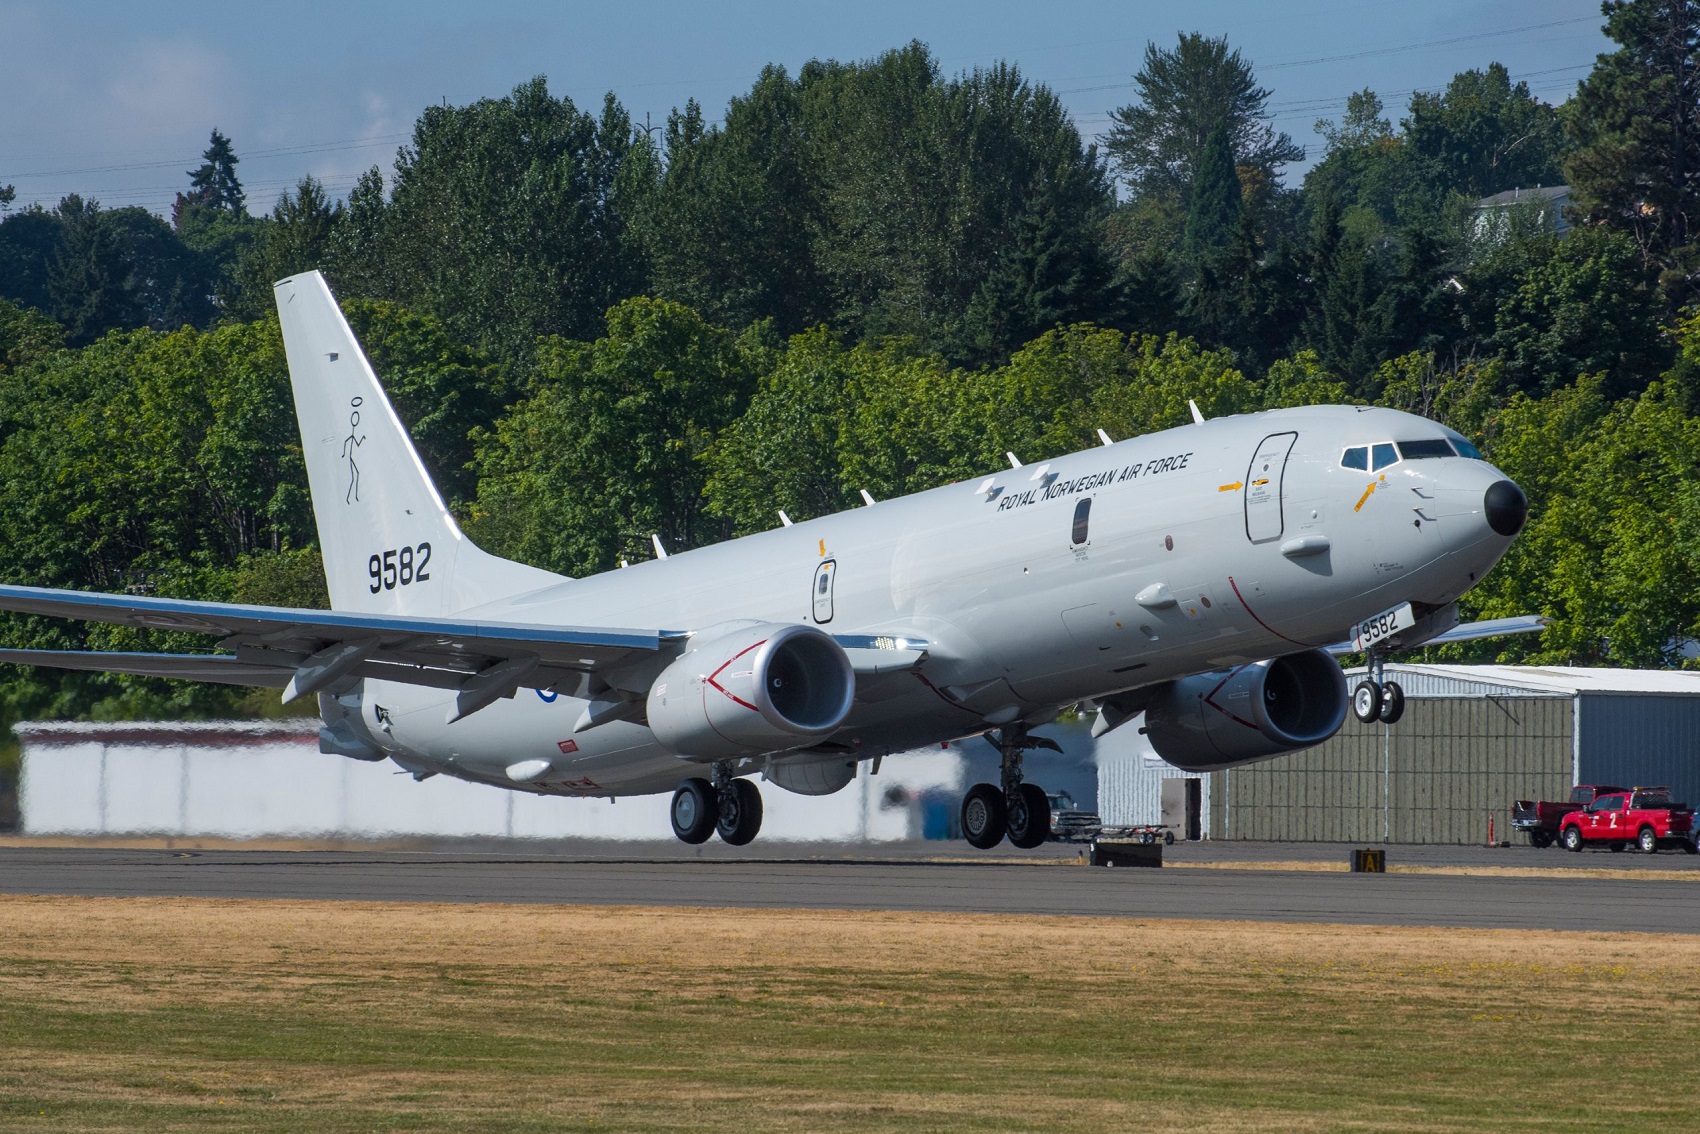 Royal Norwegian Air Force’s First Boeing P-8A Poseidon Performs Maiden Flight